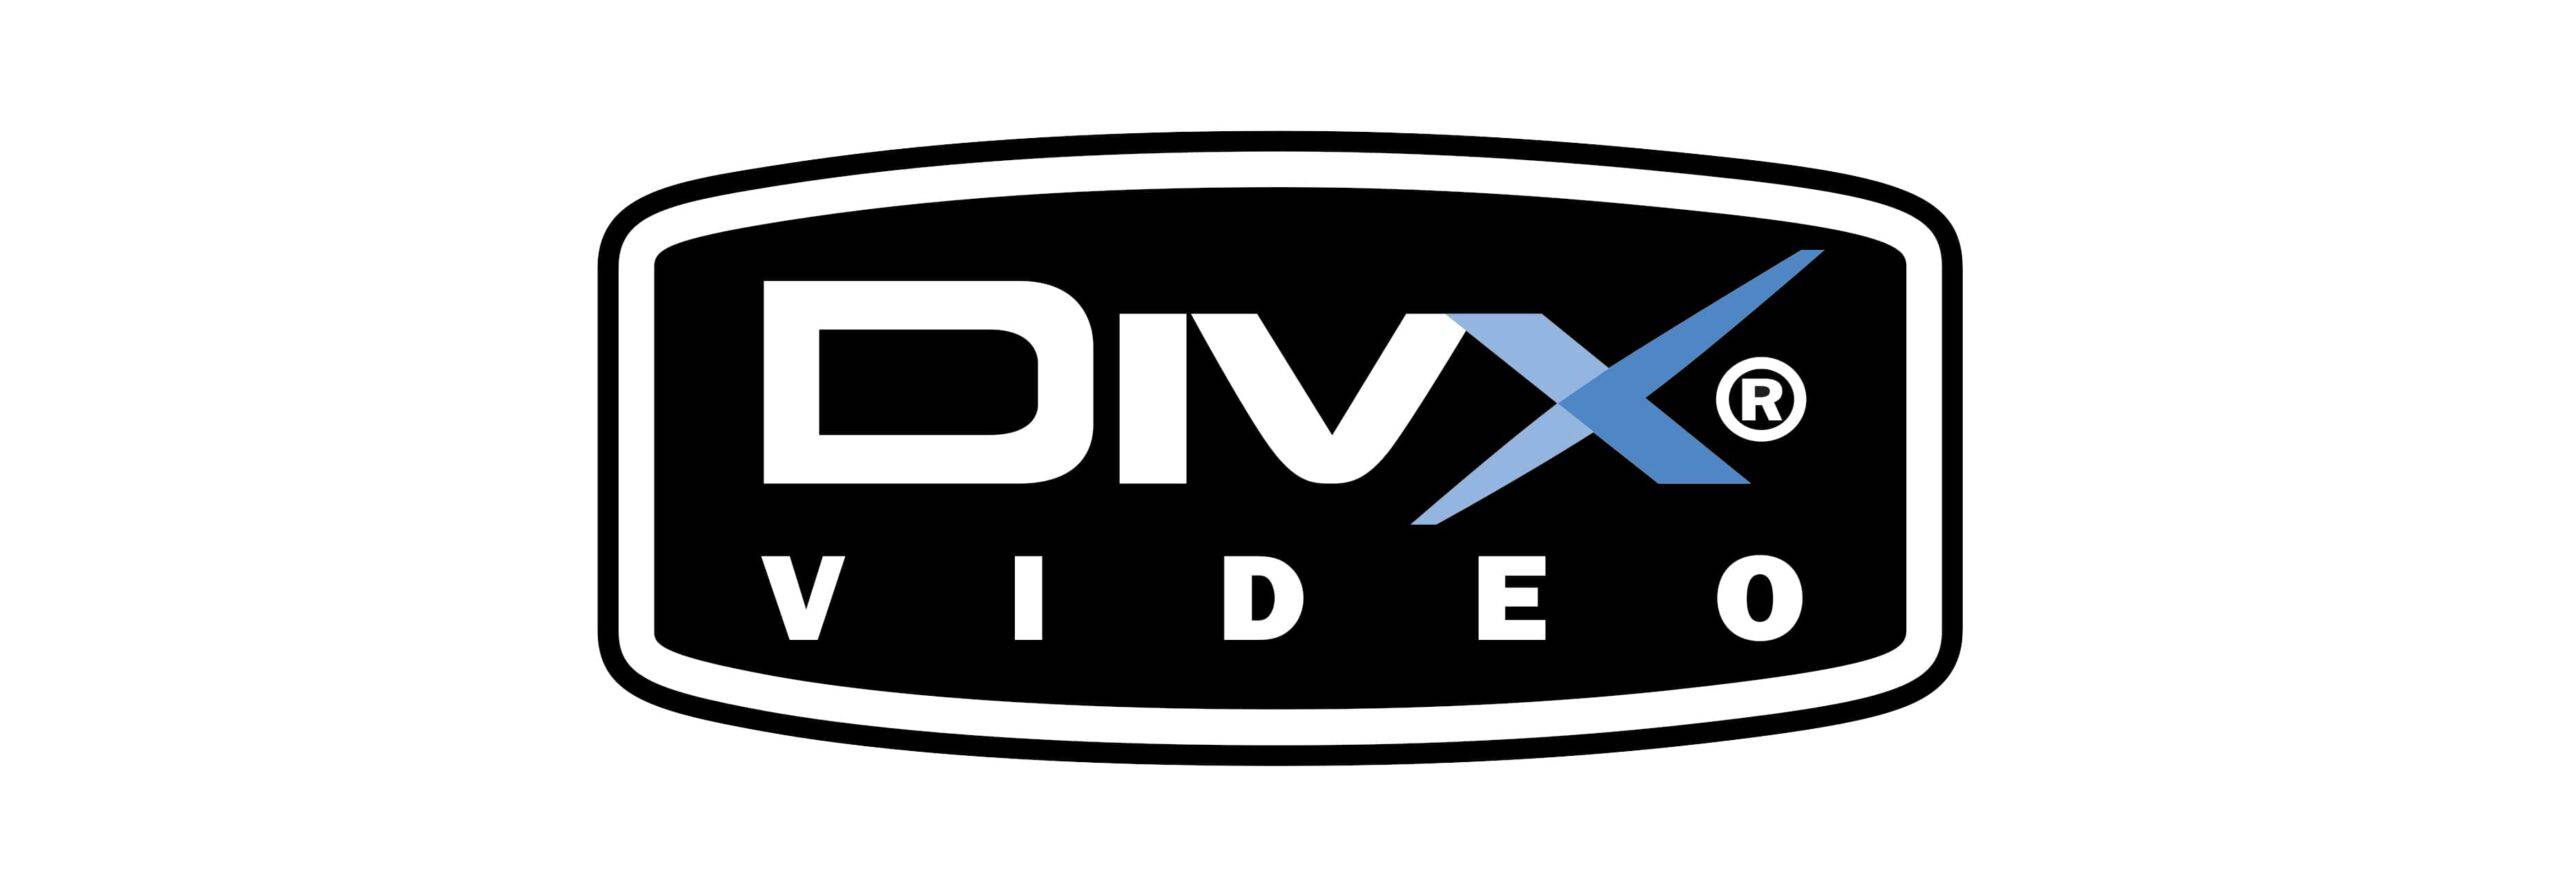 Circuit City's DIVX discs and video player